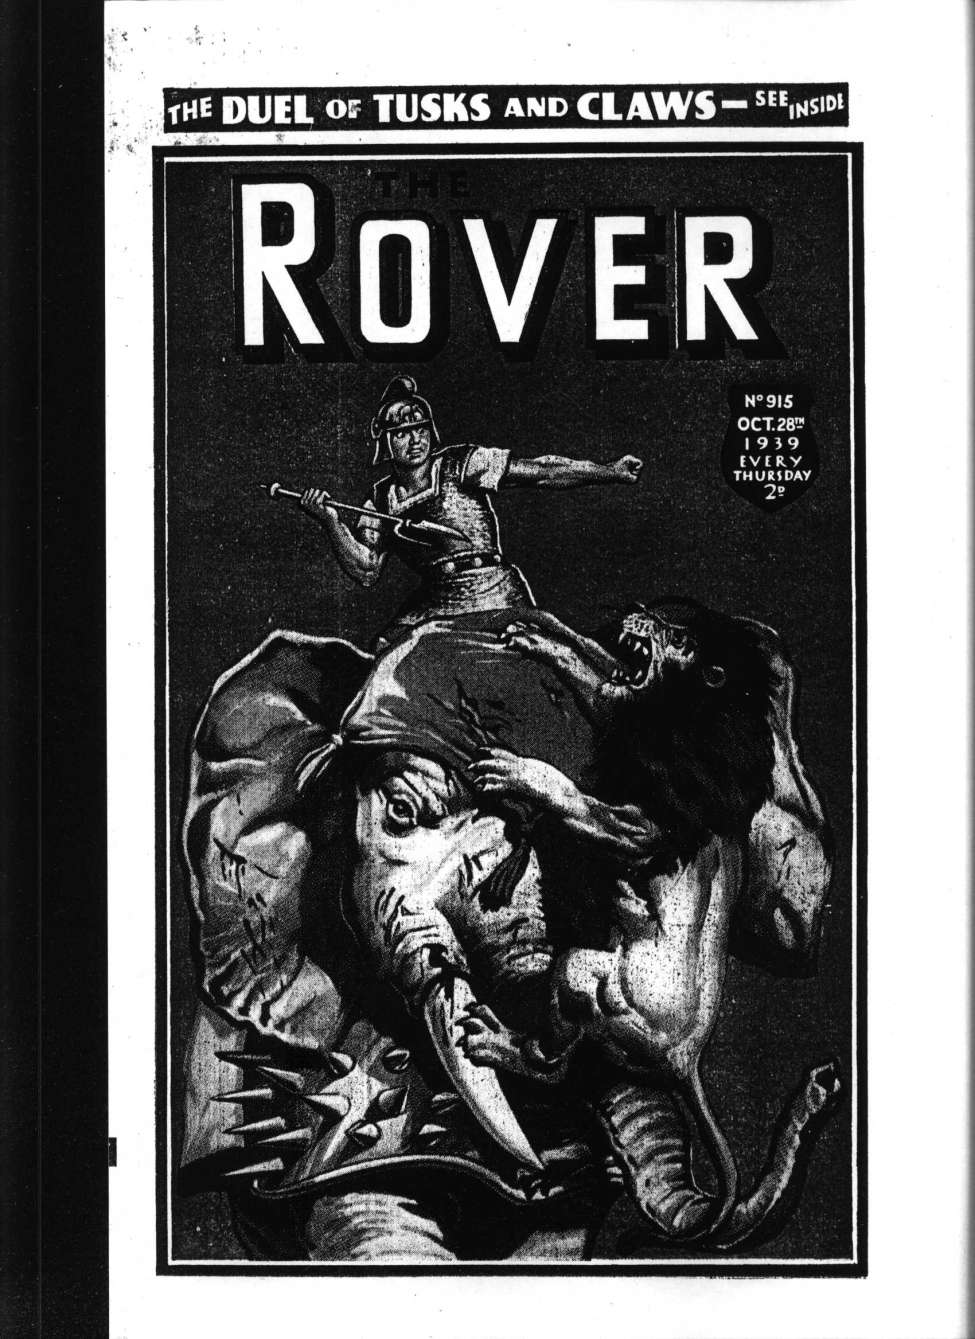 Book Cover For The Rover 915